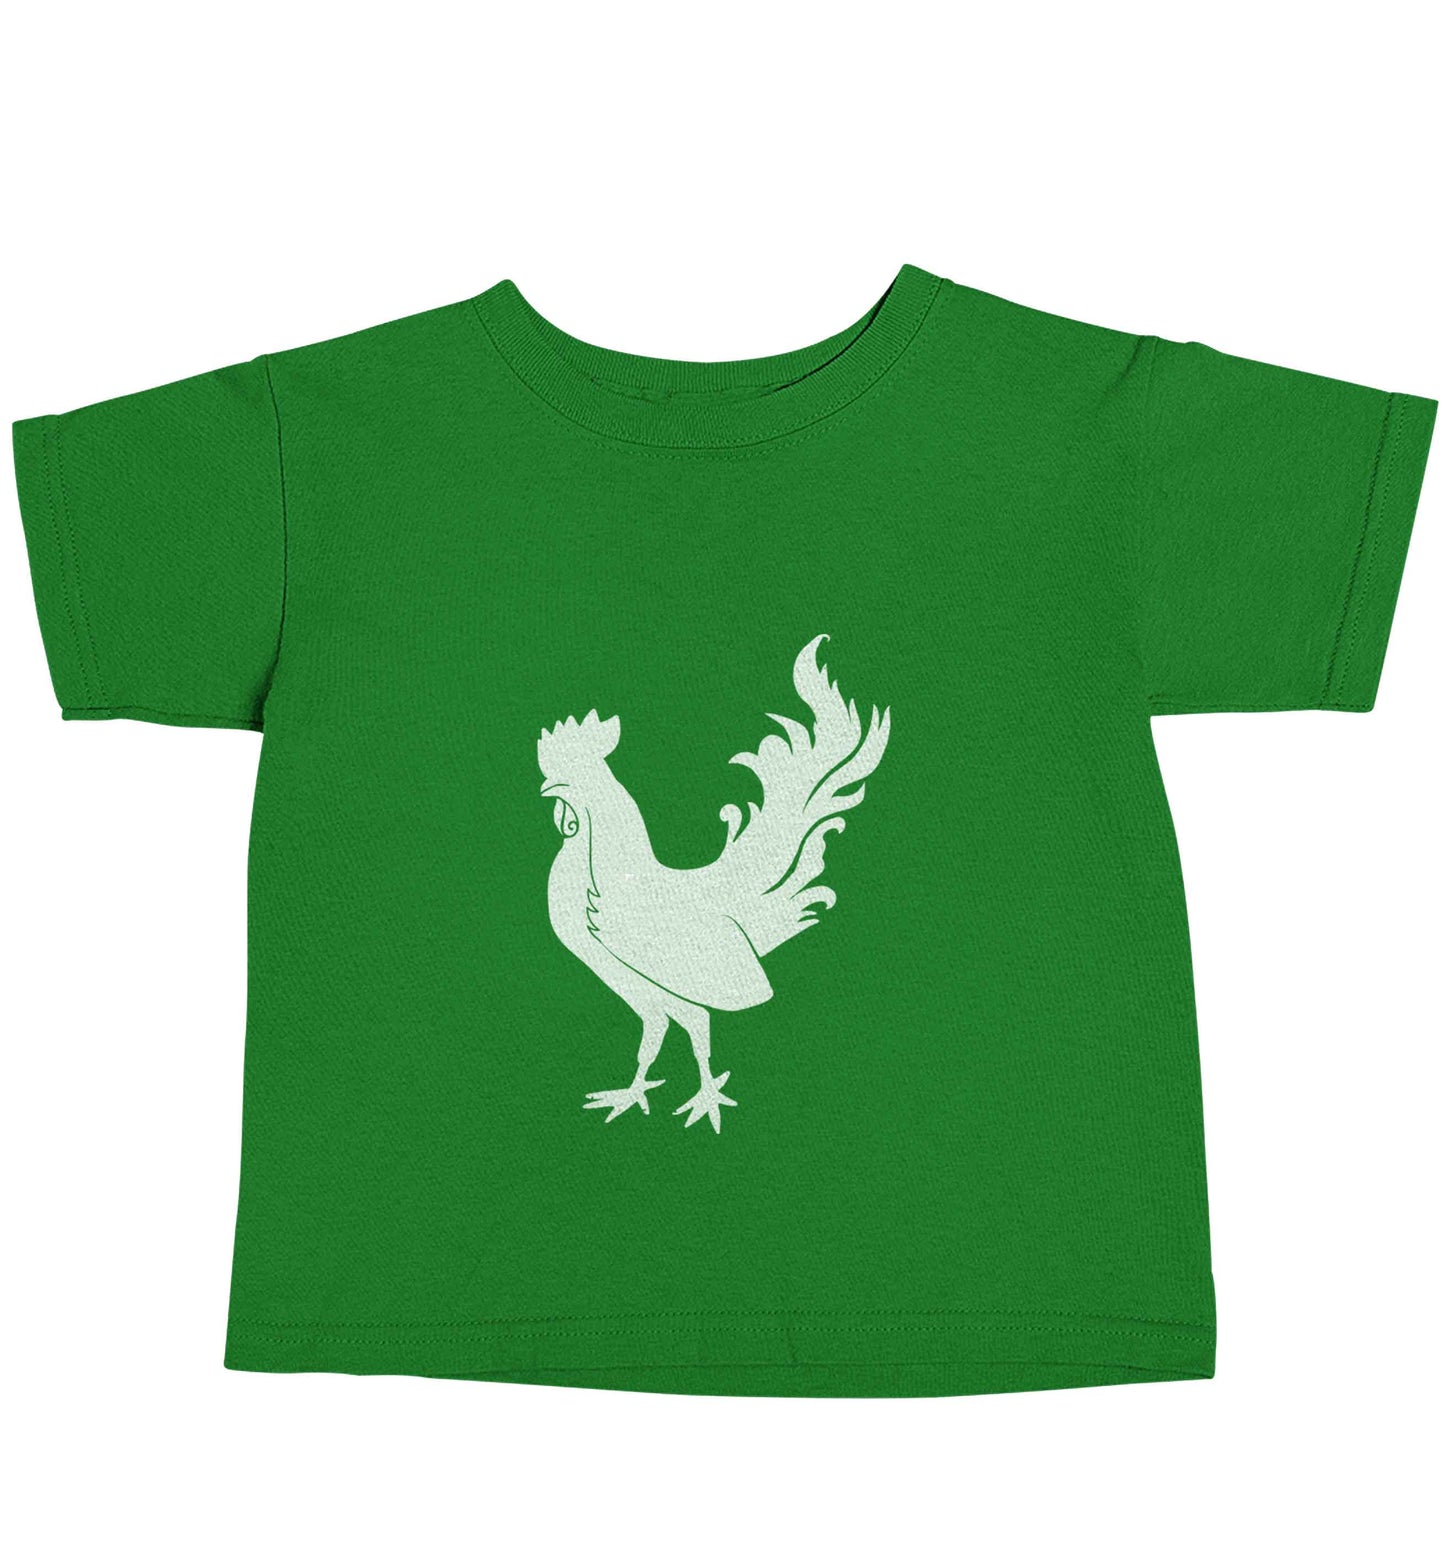 Rooster green baby toddler Tshirt 2 Years